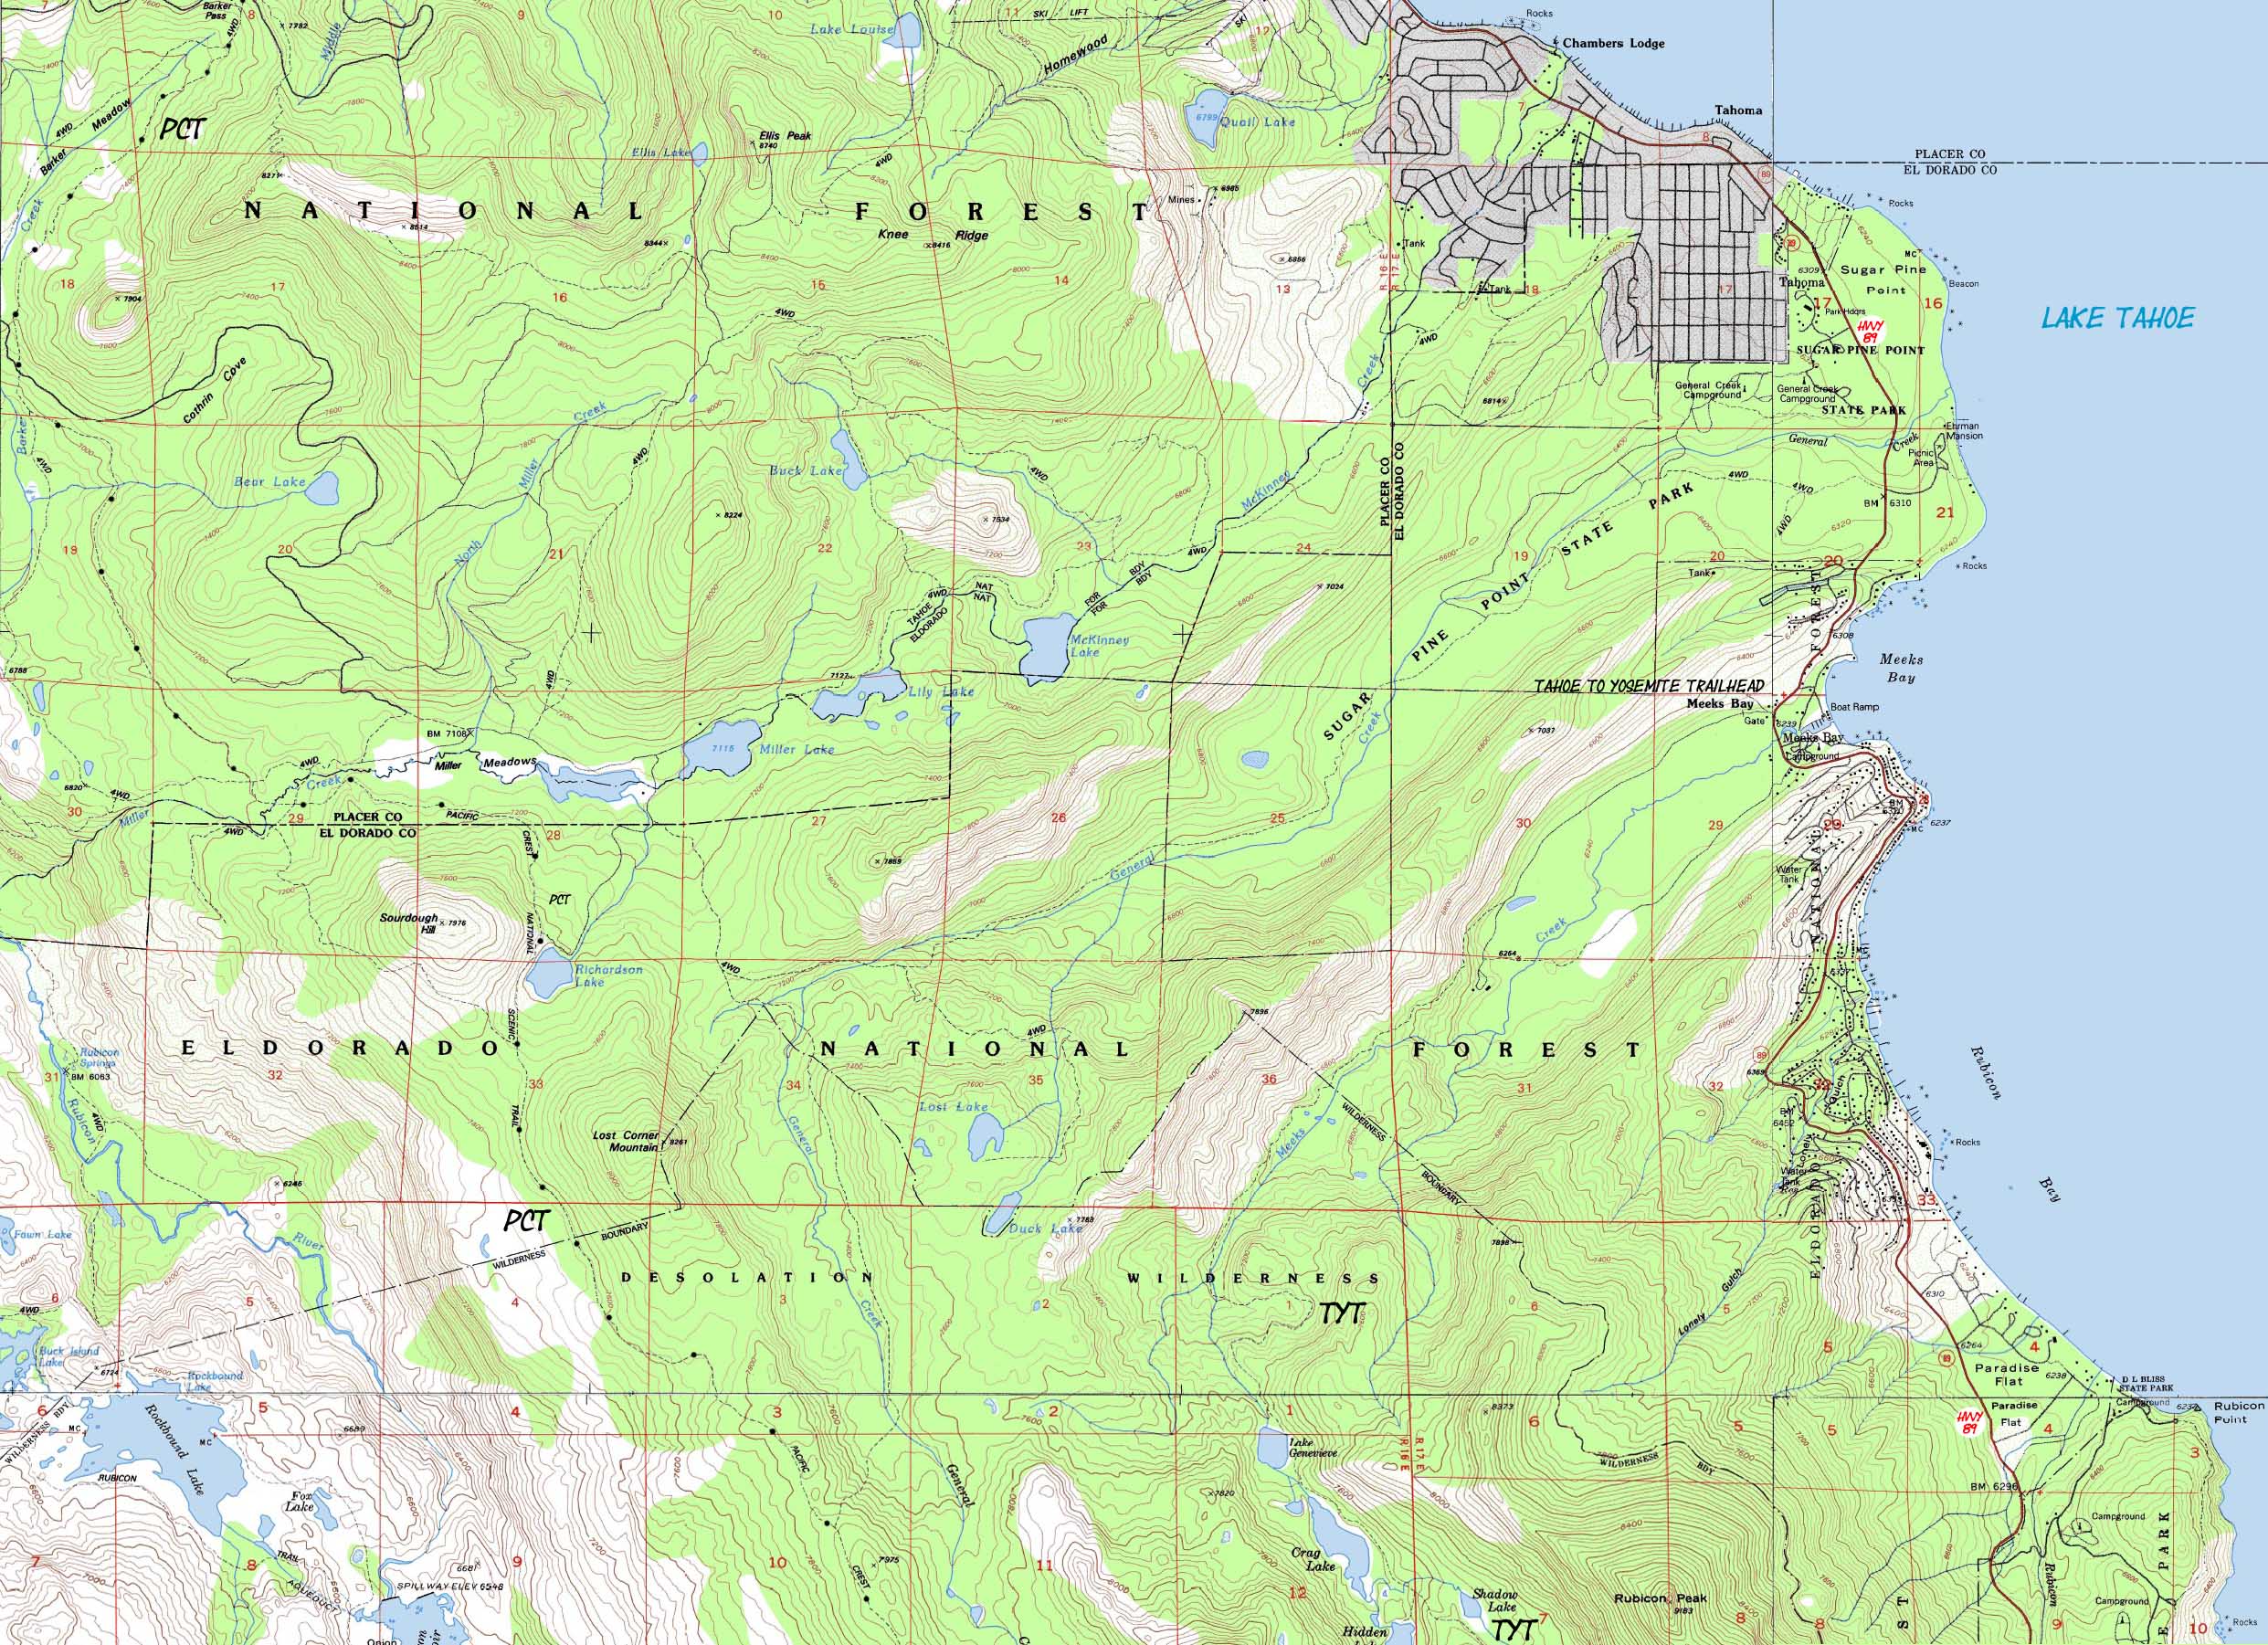 North Desolation and Sugar Pine State Park backpacking map.